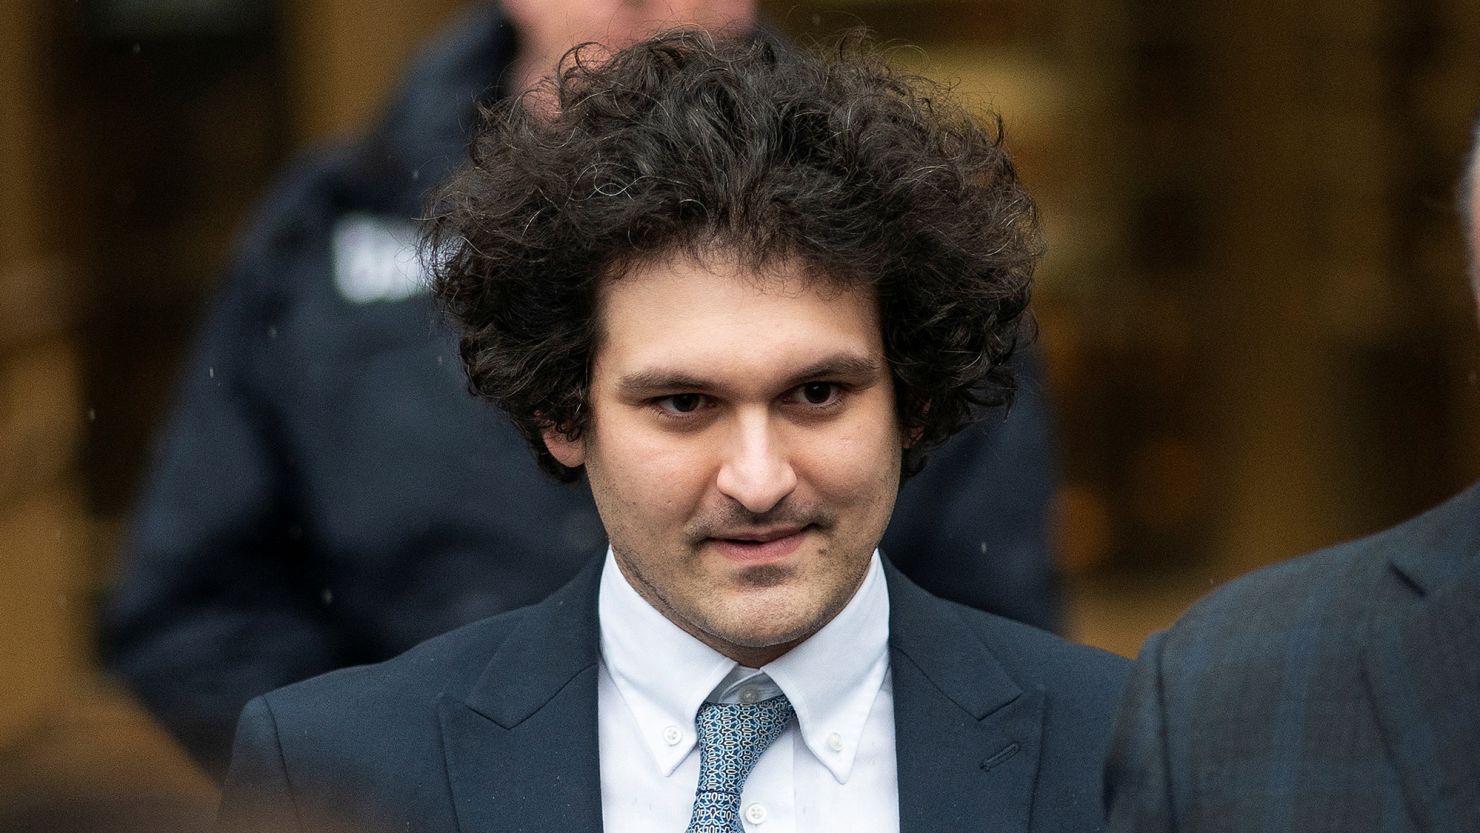 Sam Bankman-Fried outside a Manhattan court in New York last year. The 32-year-old former CEO of the now-bankrupt crypto exchange FTX was found guilty in November for what prosecutors say is likely "the largest fraud of the last decade."